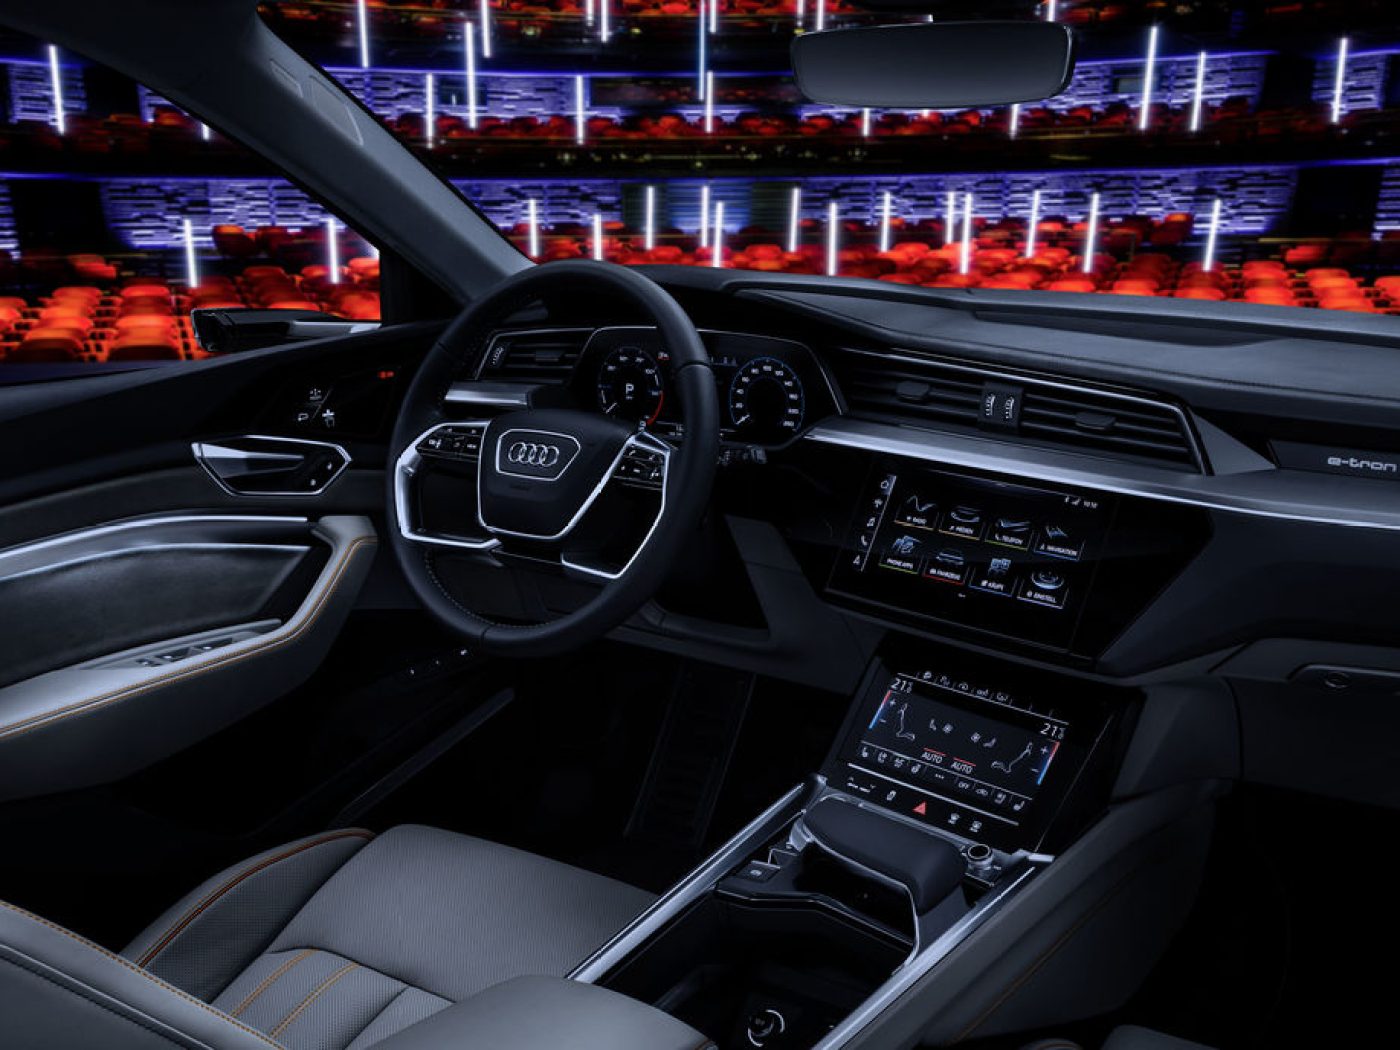 See More With the Latest in Vehicle Camera Technology From Audi